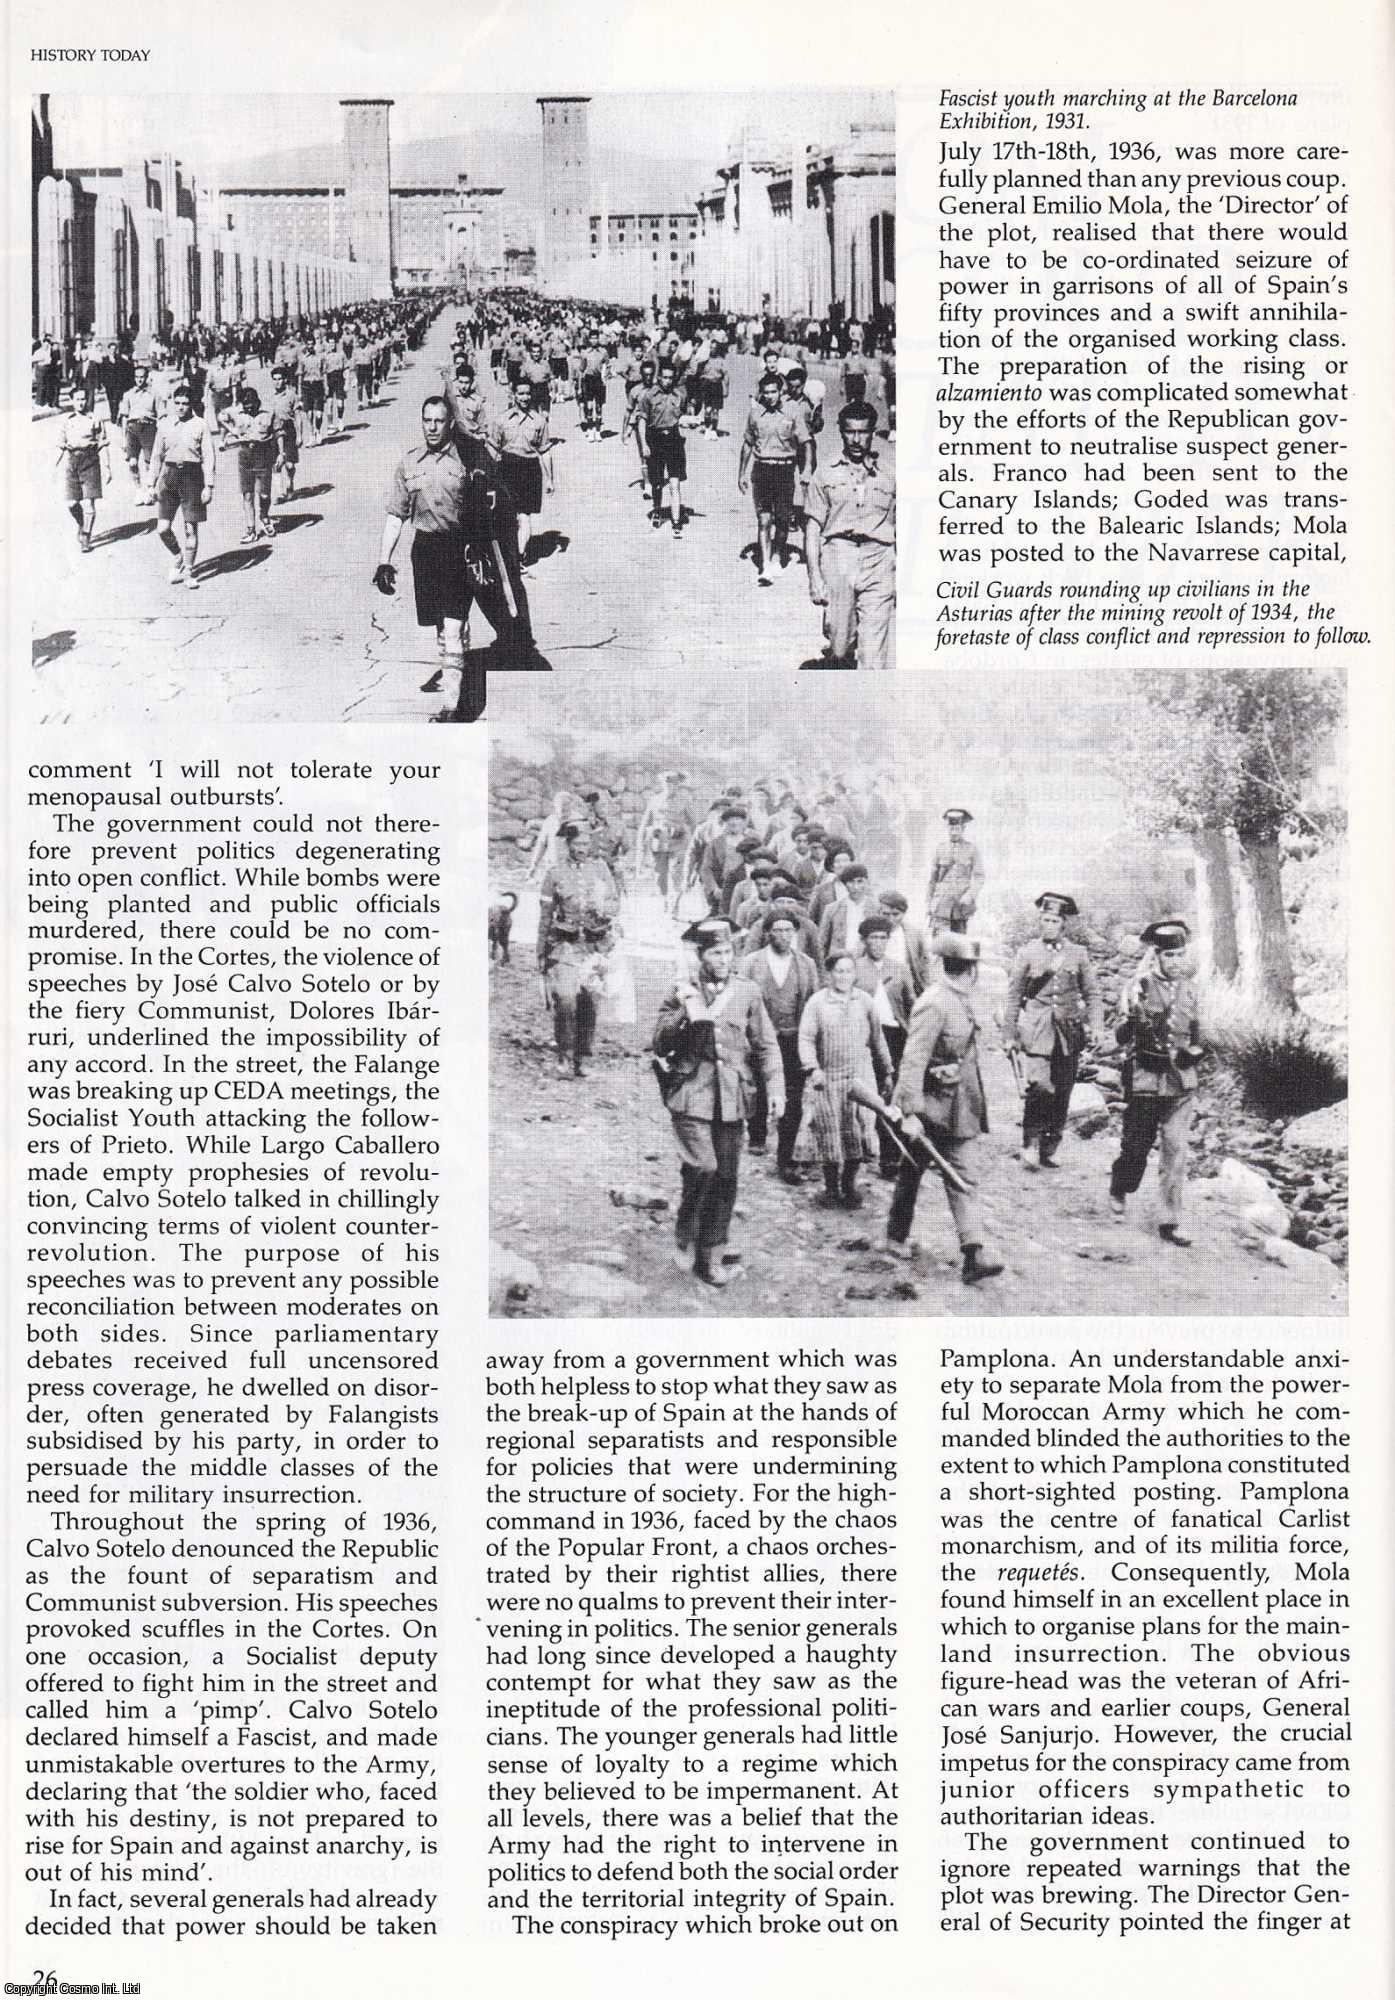 Paul Preston - Spain 1936: From Coup d'Etat to Civil War. An original article from History Today, 1986.